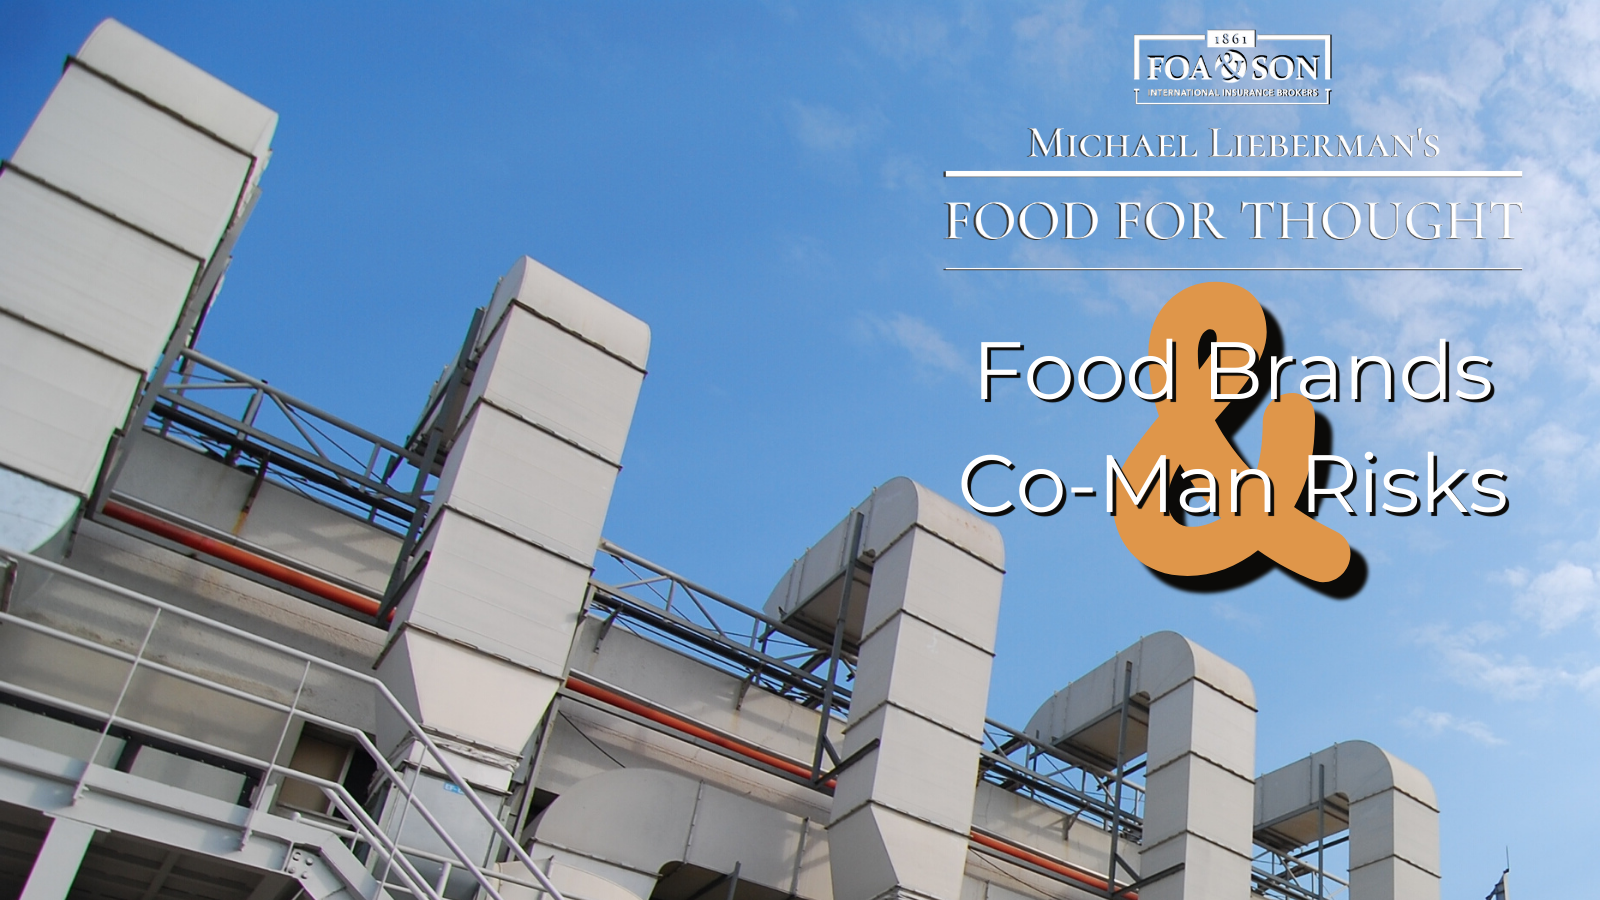 A graphic with a photo of a food factory and entitled 'Michael Lieberman's Food For Thought: Food Brands and Co-Man Risks'